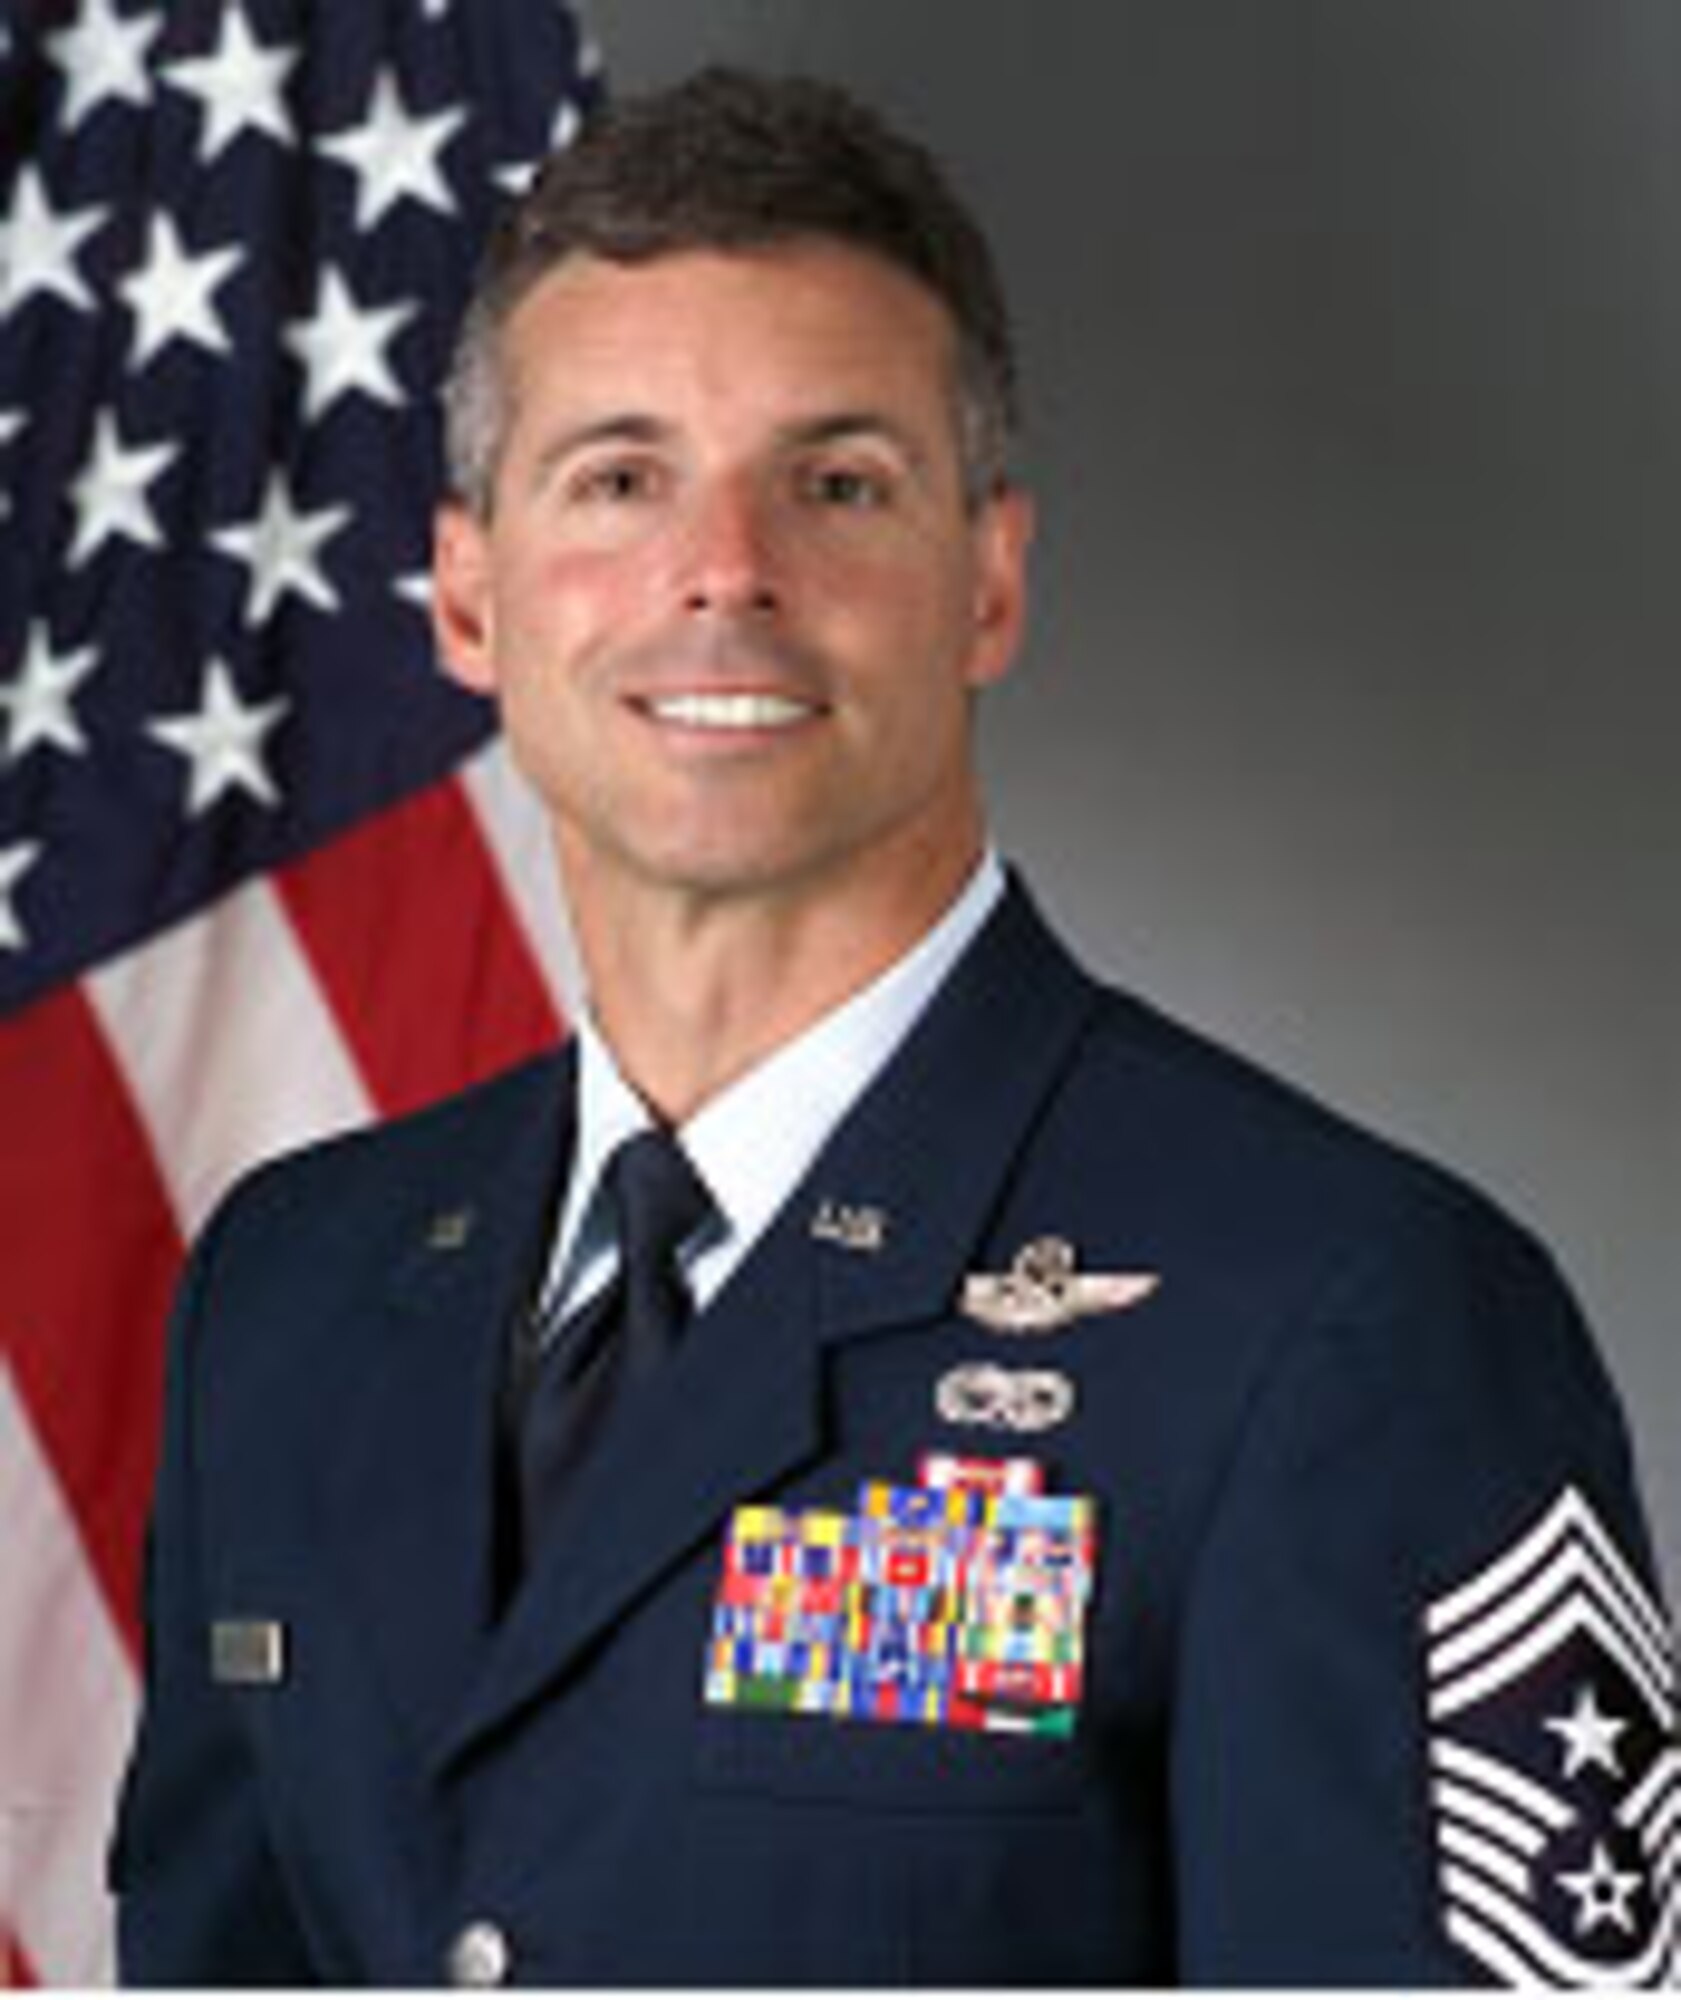 435th Air Base Wing Command Chief Master Sgt. David Spector